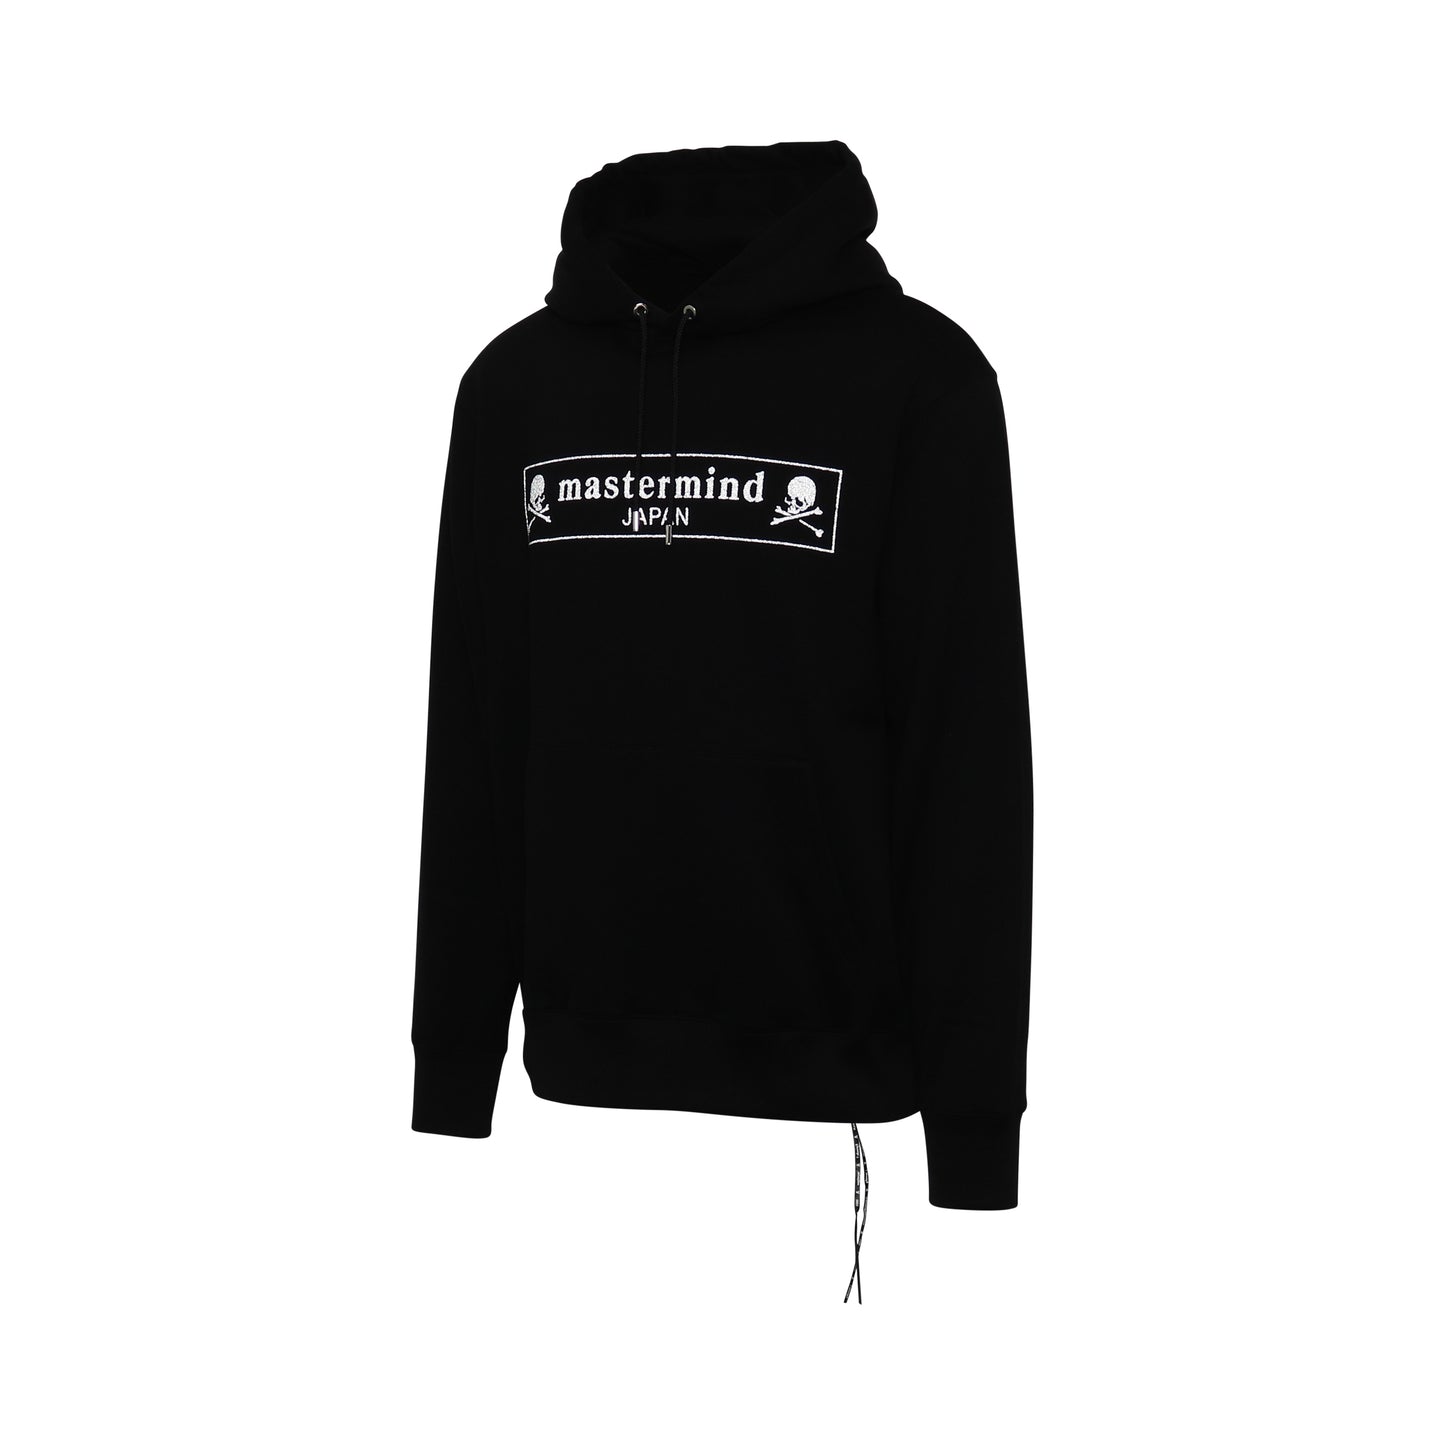 Boxed Logo Glass Beads Hoodie in Black